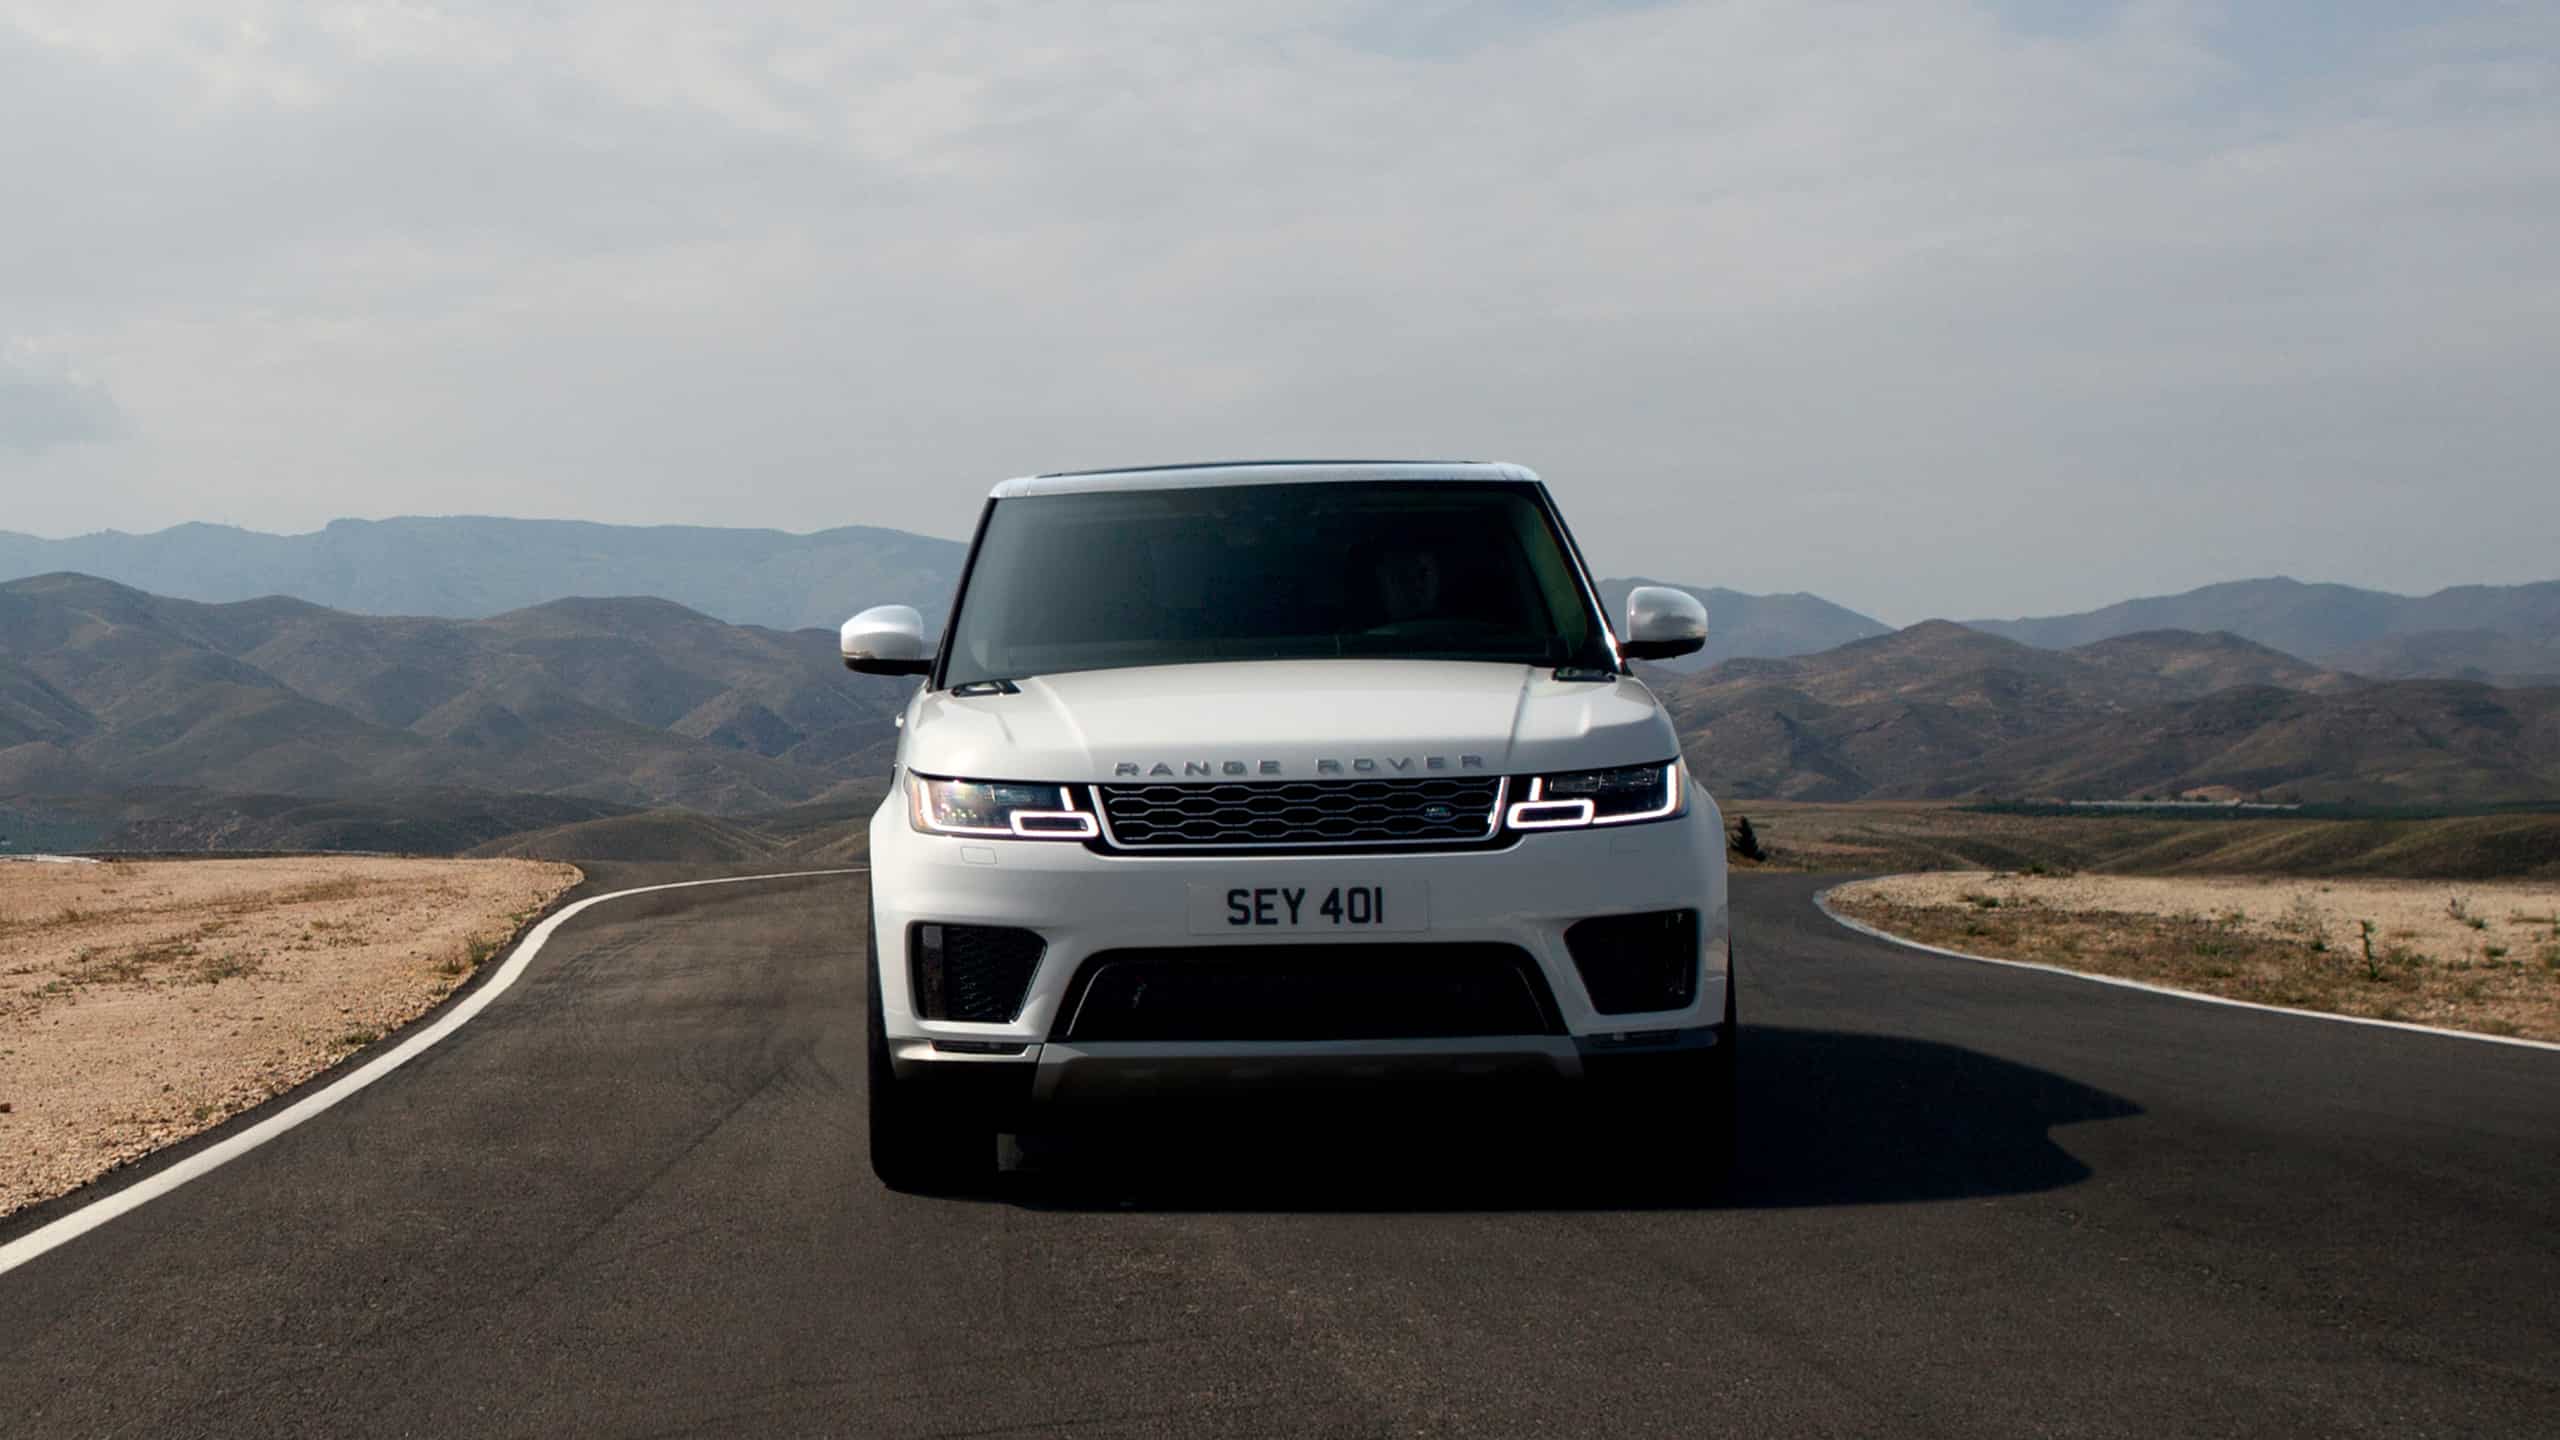 Range Rover Sport Driving On Mountain Runway Road